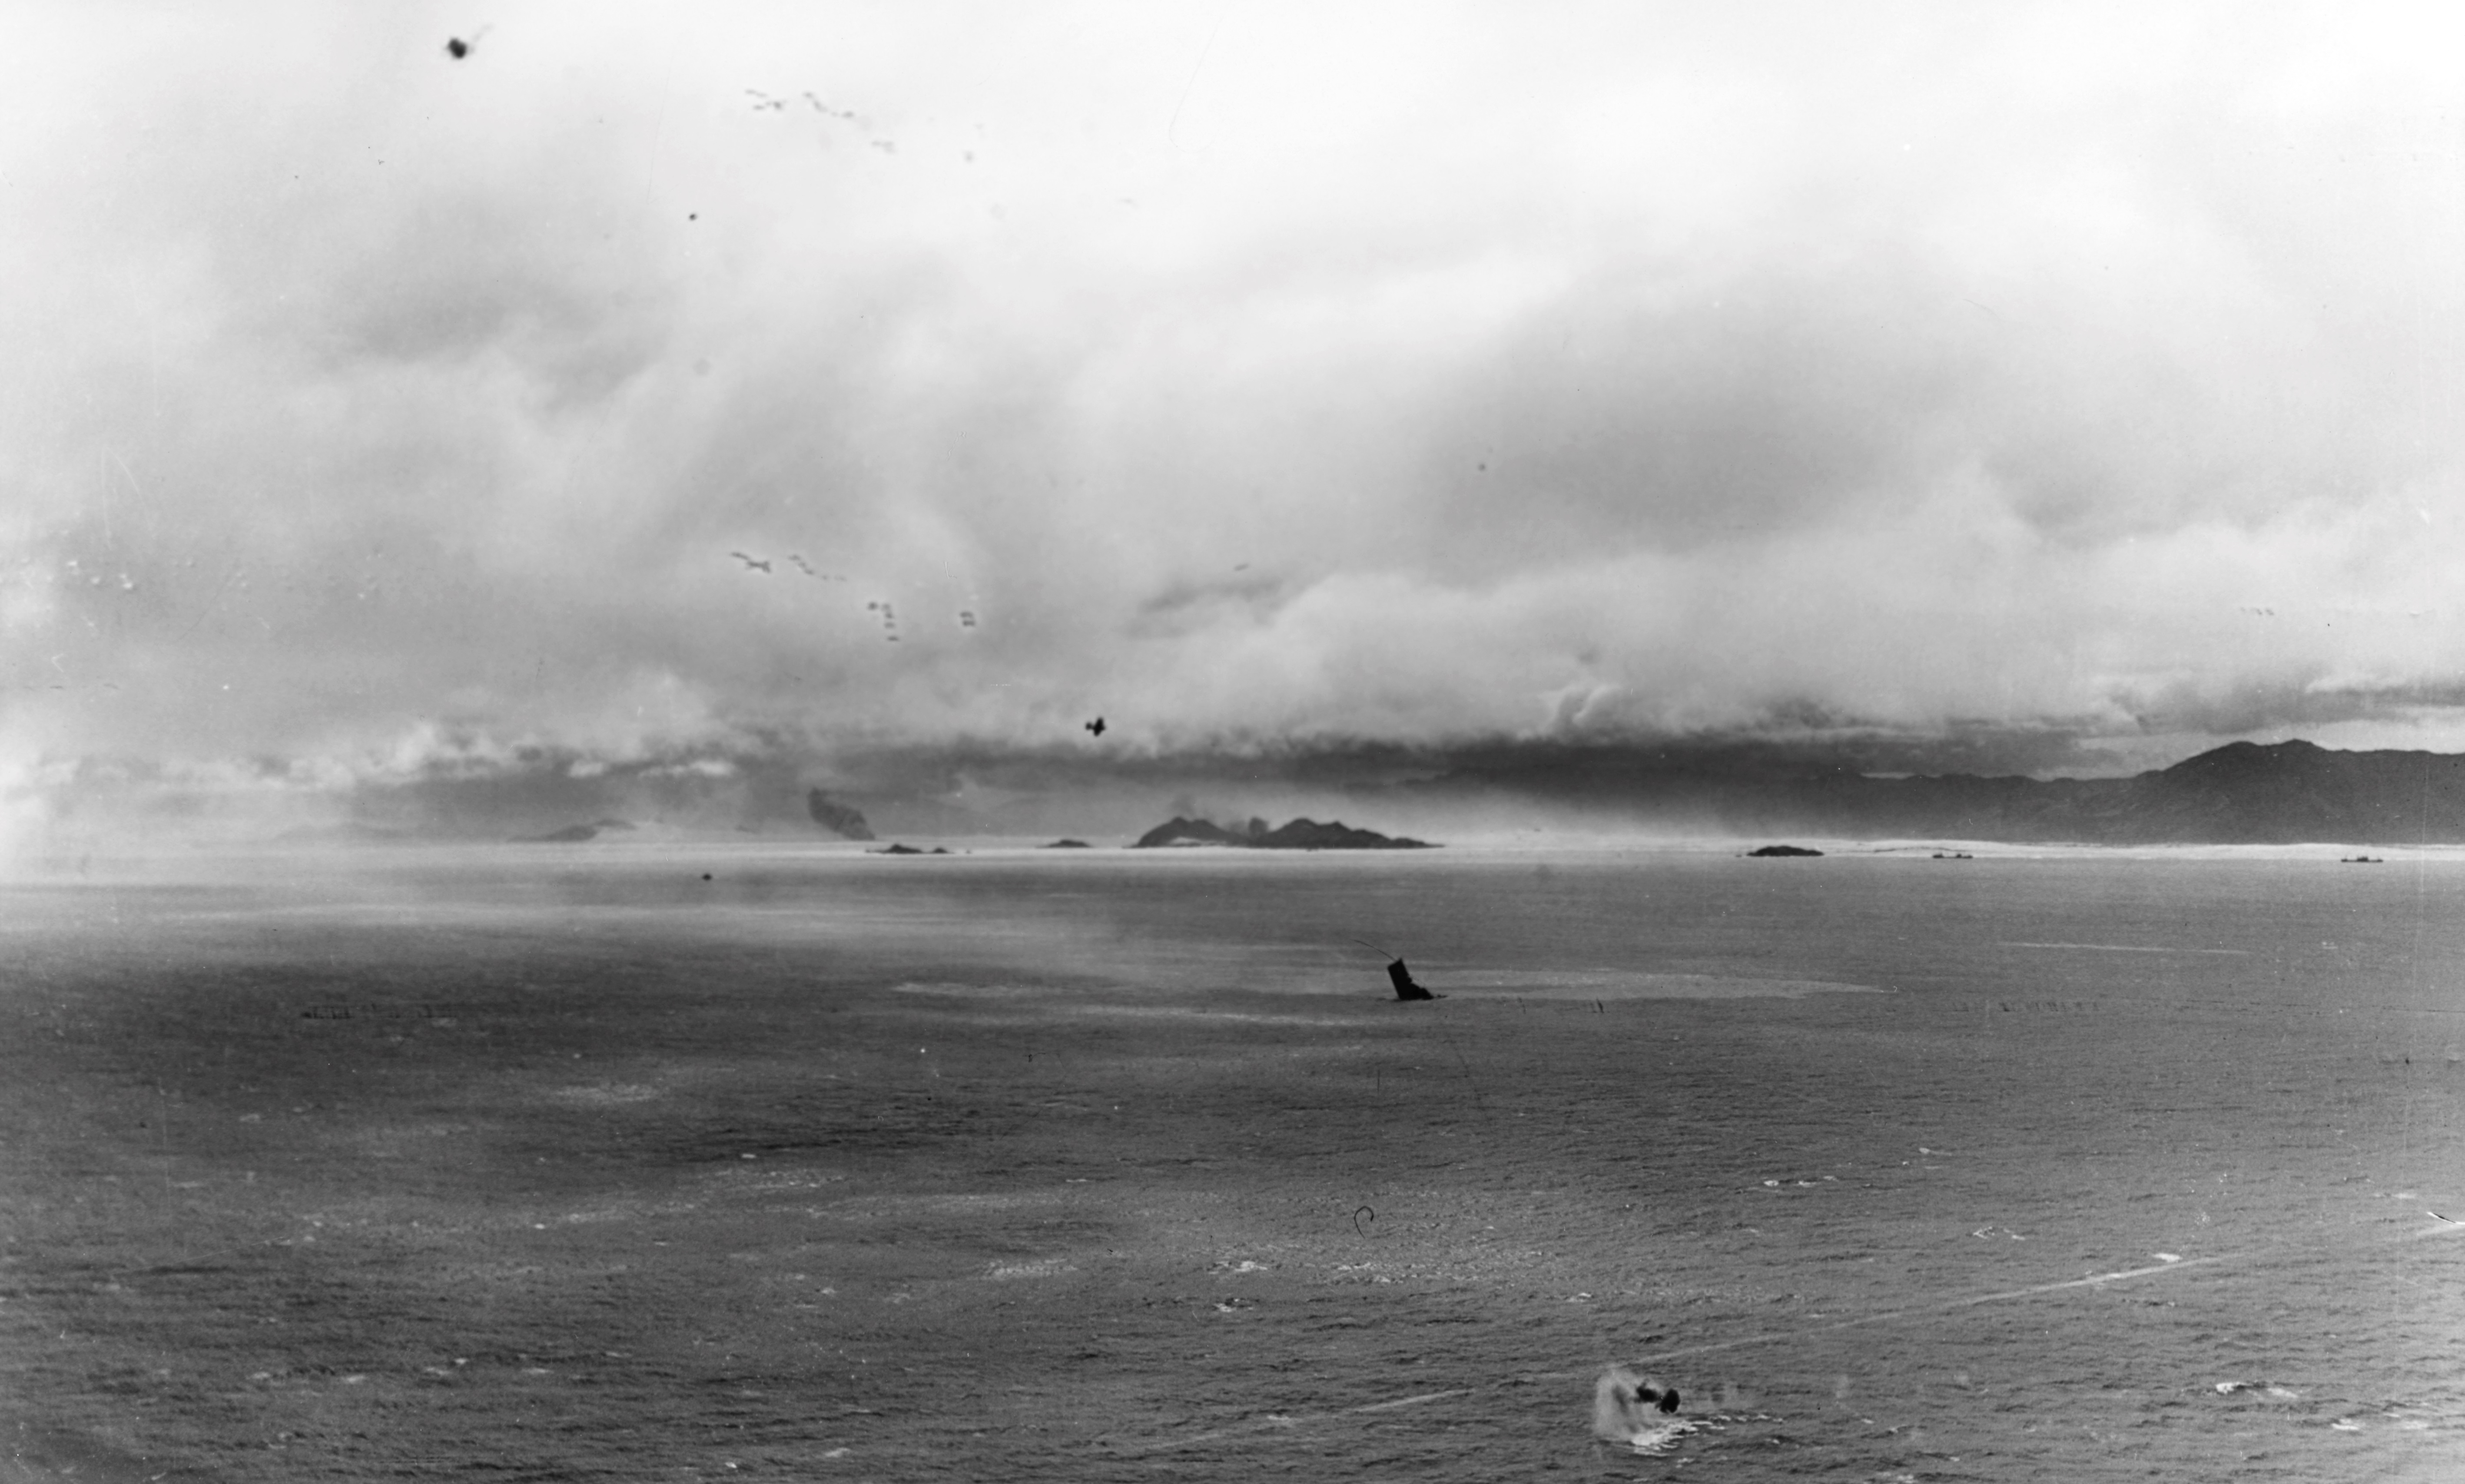 Japanese cruiser Kashii sinking with only the bow showing after being attacked by United States carrier aircraft off the coast of French Indochina (Vietnam) north of Qui Nhon, Jan 12, 1945. Photo 8 of 9